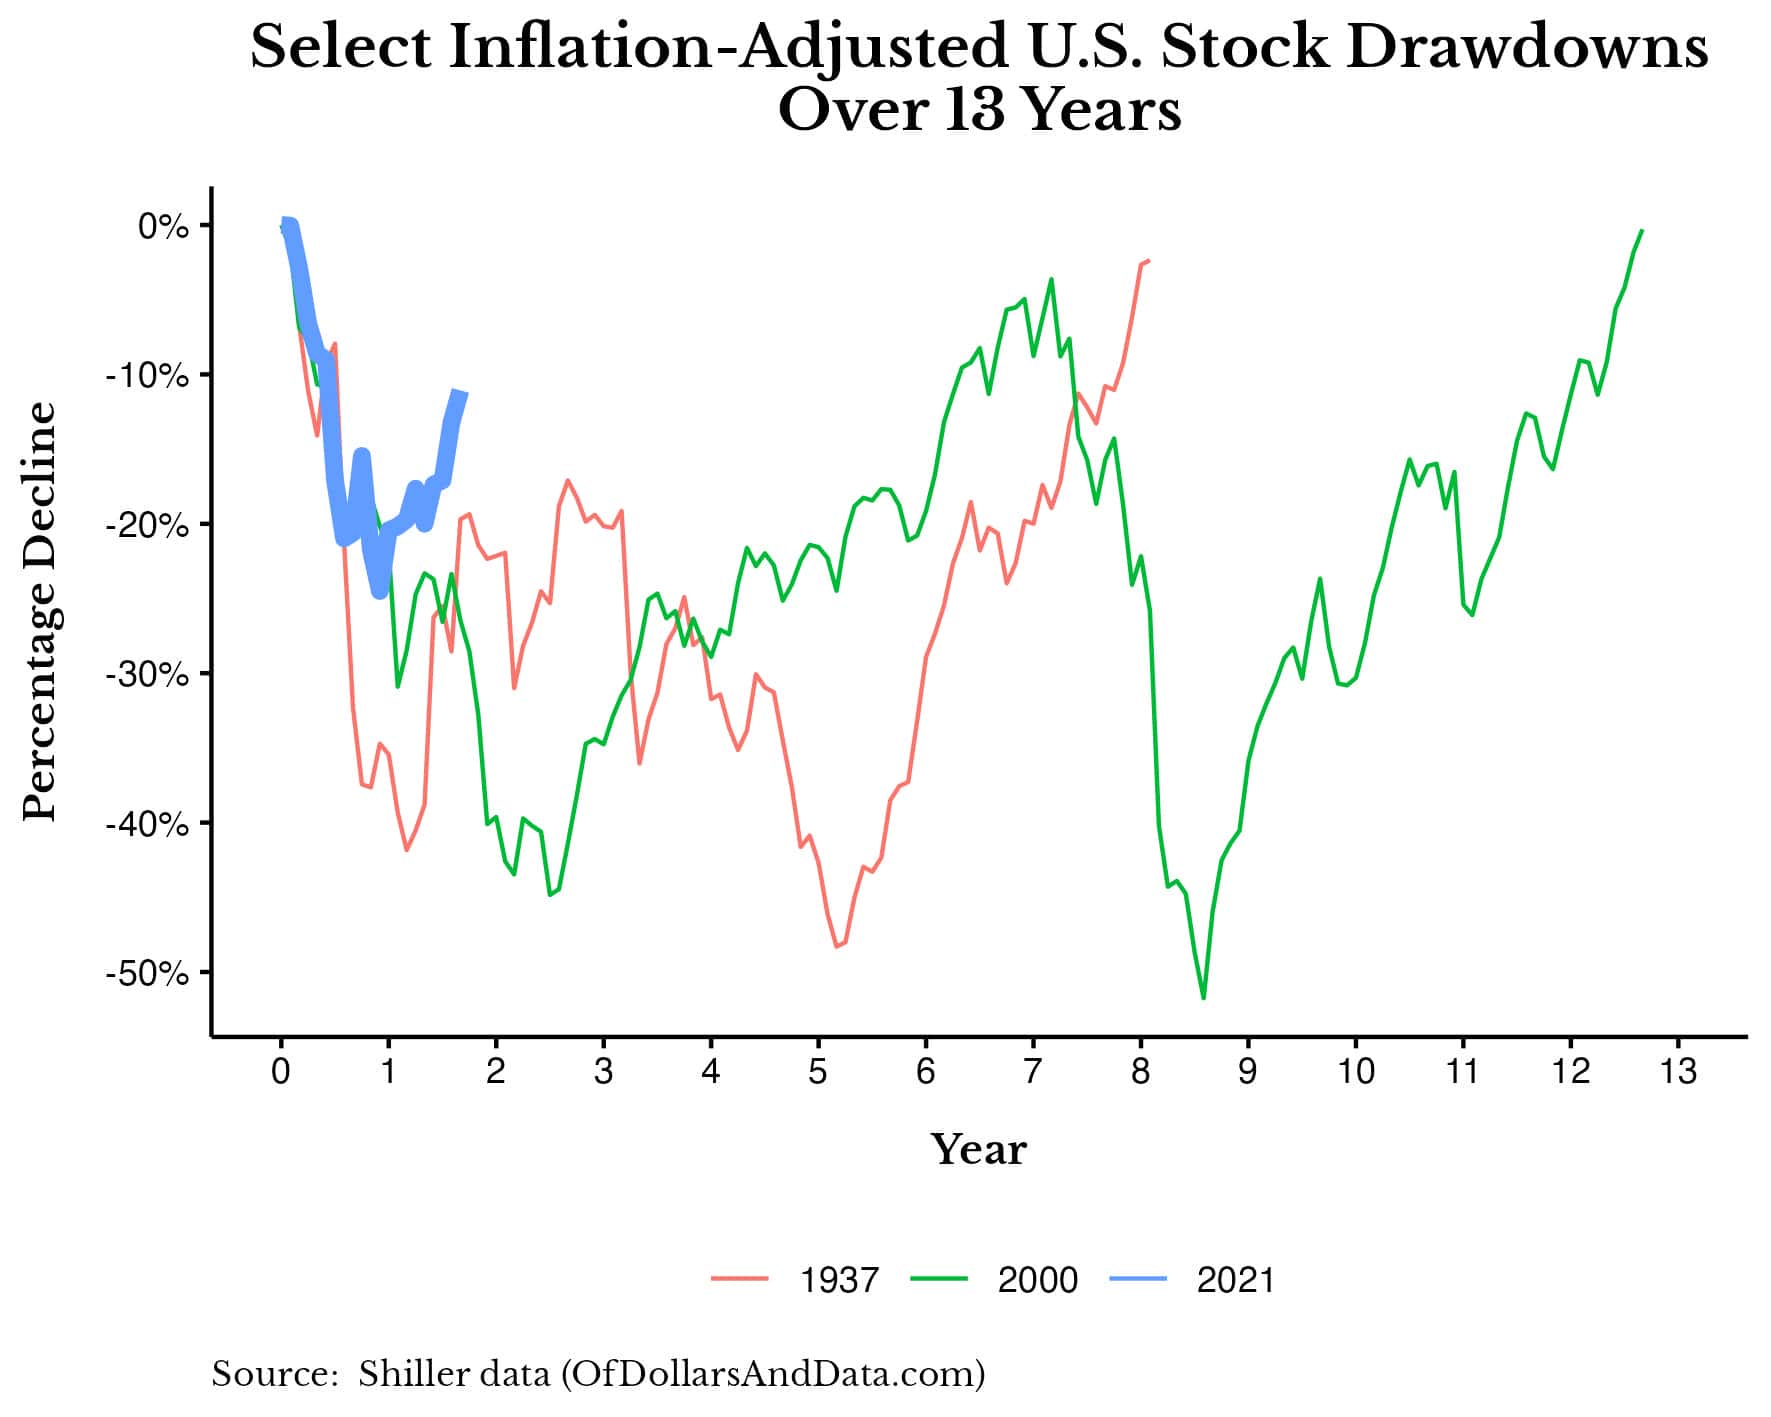 Chart of the select inflation-adjusted drawdowns in U.S. stocks over 13 years.